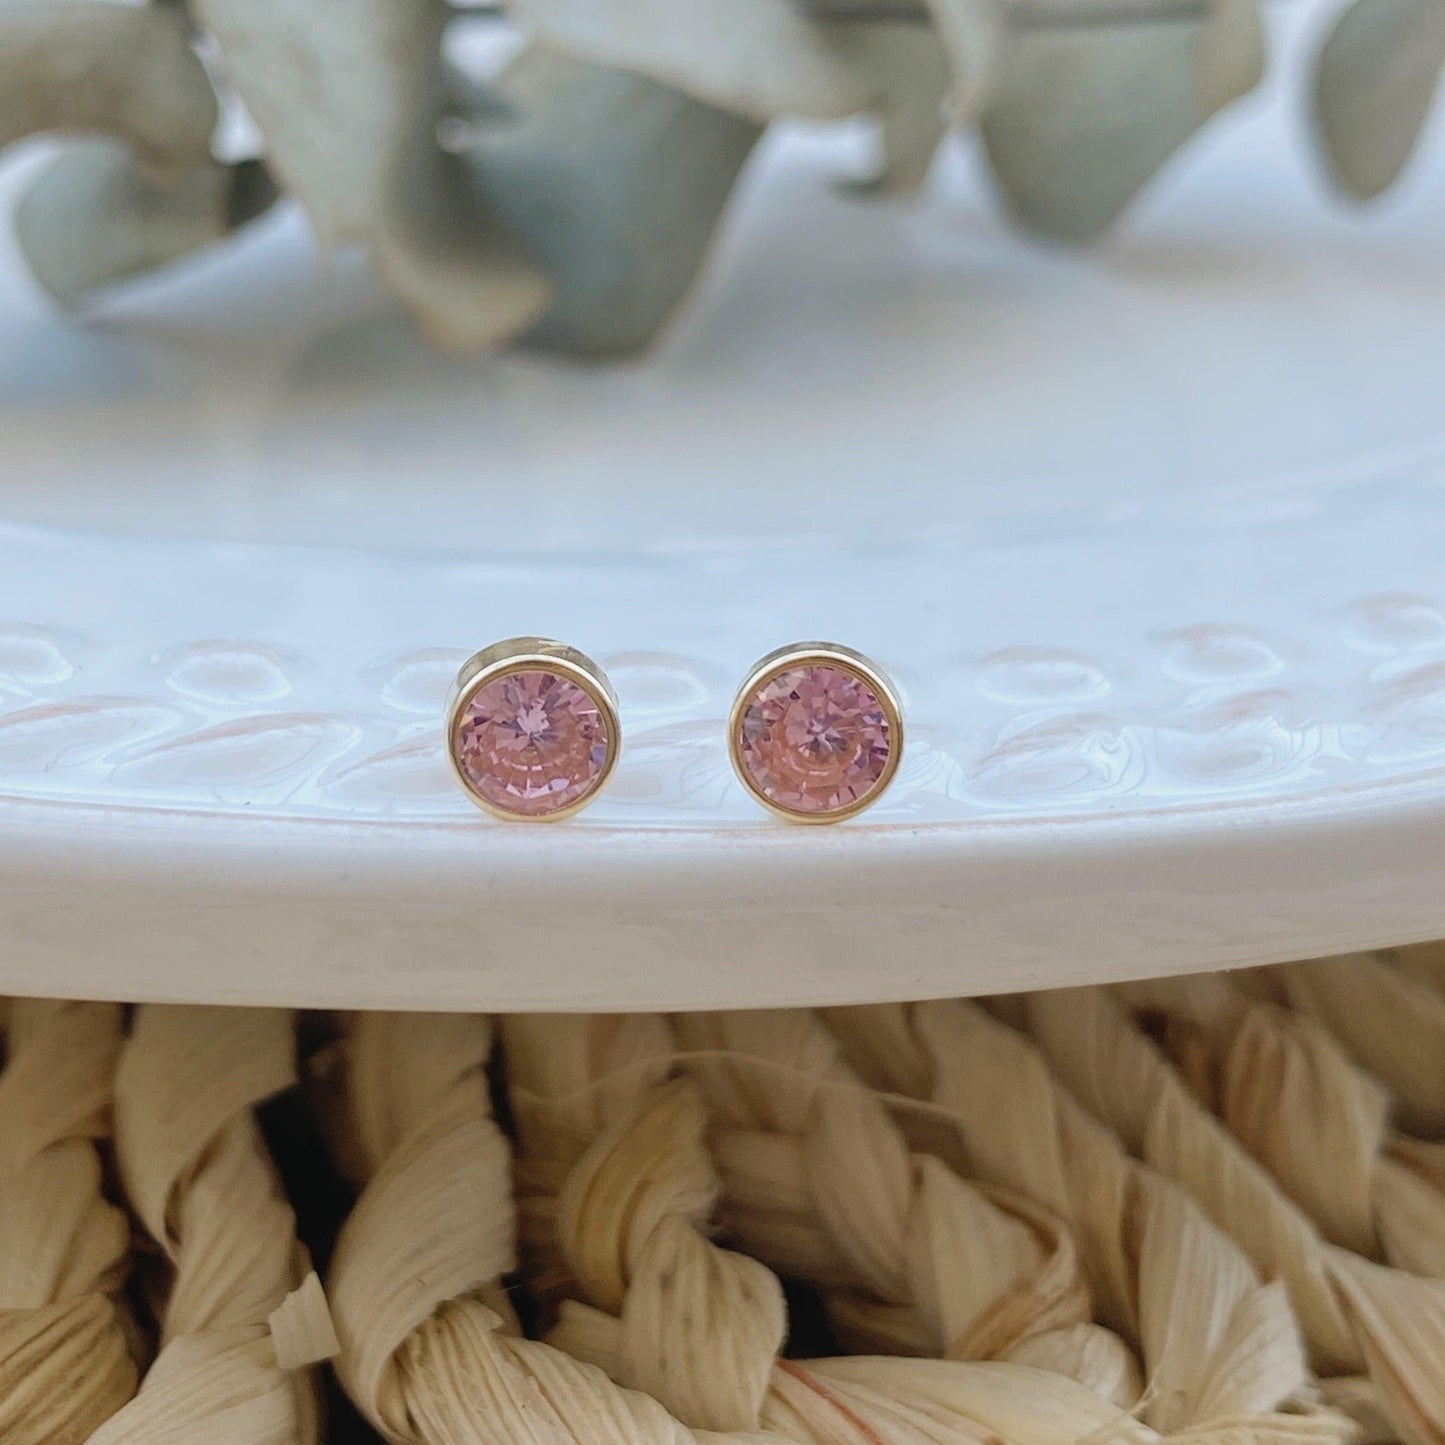 These 14k gold bezel studs with a screw-back are the perfect earrings for any occasion. Elegant and minimal in design, they are ideal as everyday earrings.